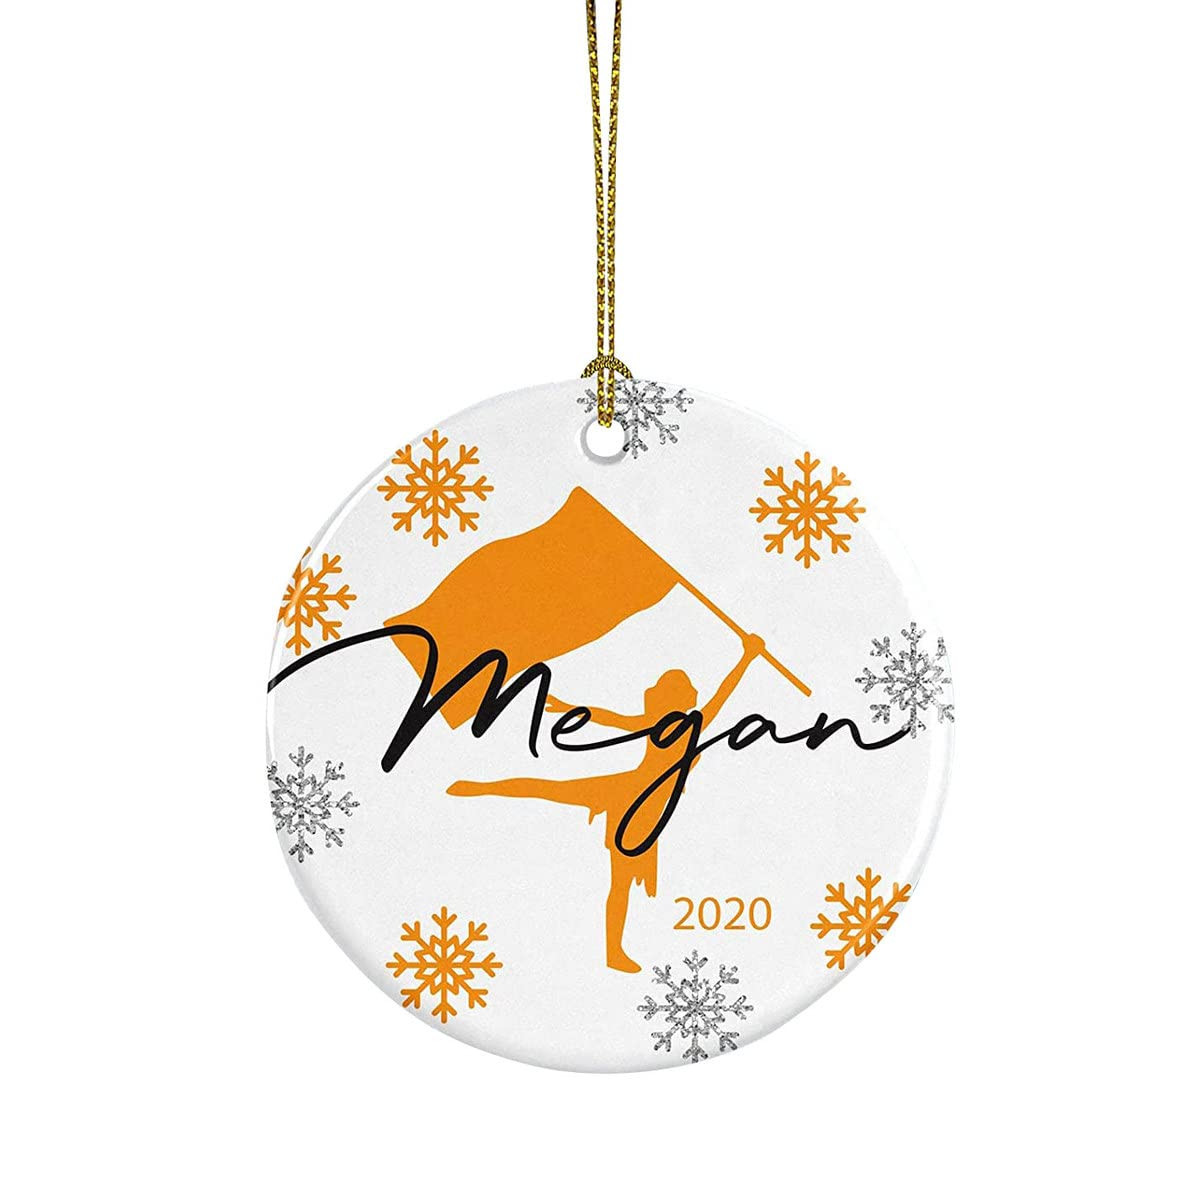 Personalized Color Guard Ornament Porcelain Ornament Color Guard Design Gifts For Majorettes And Drill Team Christmas Ornament Hanging Decoration Christmas Tree Ornament